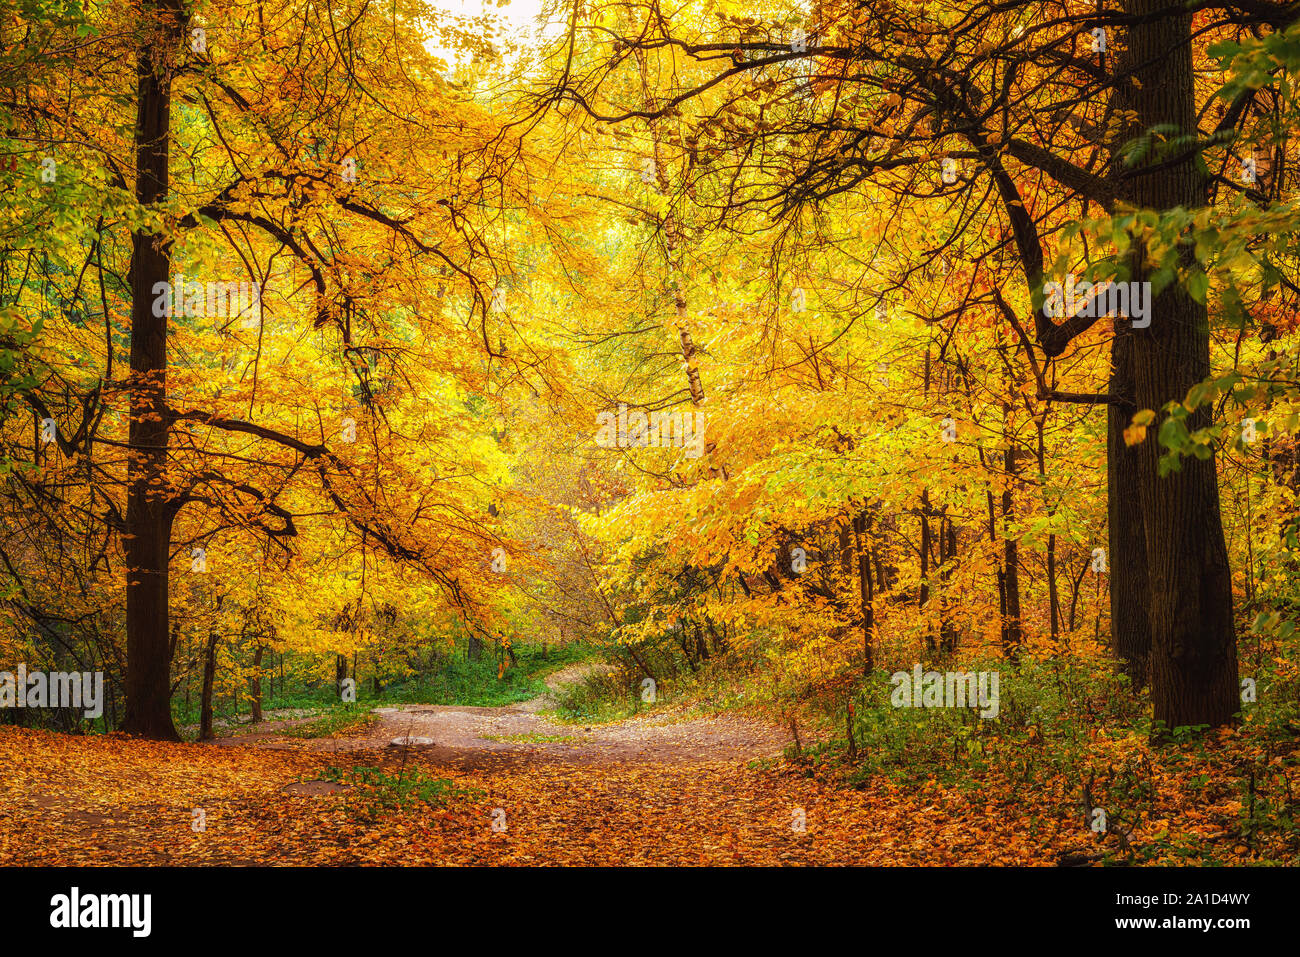 Pathway in autumn forest Stock Photo